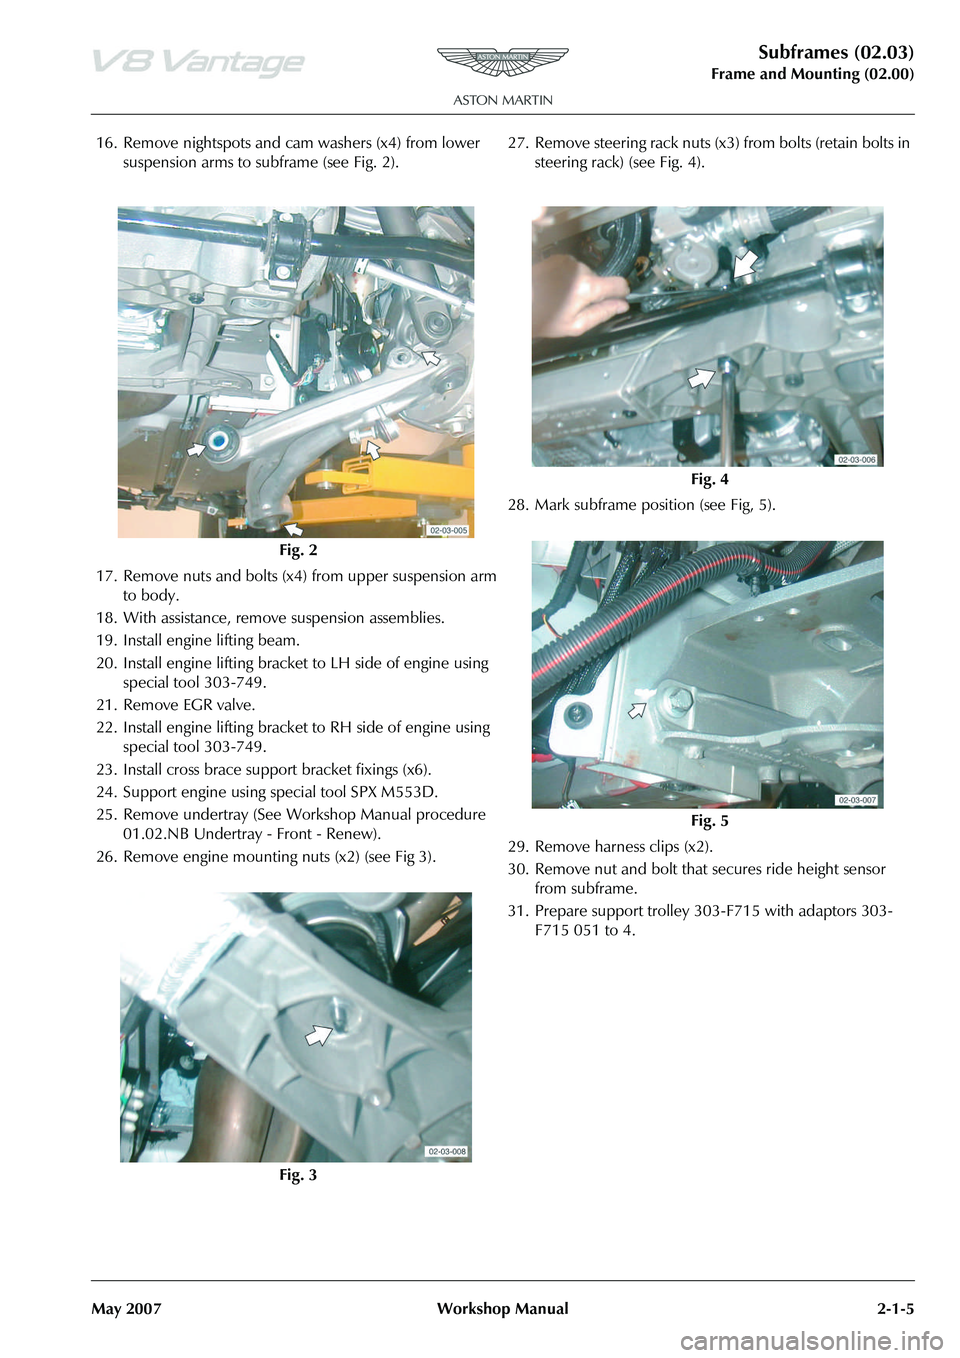 ASTON MARTIN V8 VANTAGE 2010  Workshop Manual Subframes (02.03)
Frame and Mounting (02.00)
May 2007 Workshop Manual 2-1-5
16. Remove nightspots and cam washers (x4) from lower  suspension arms to subframe (see Fig. 2).
17. Remove nuts and bolts (